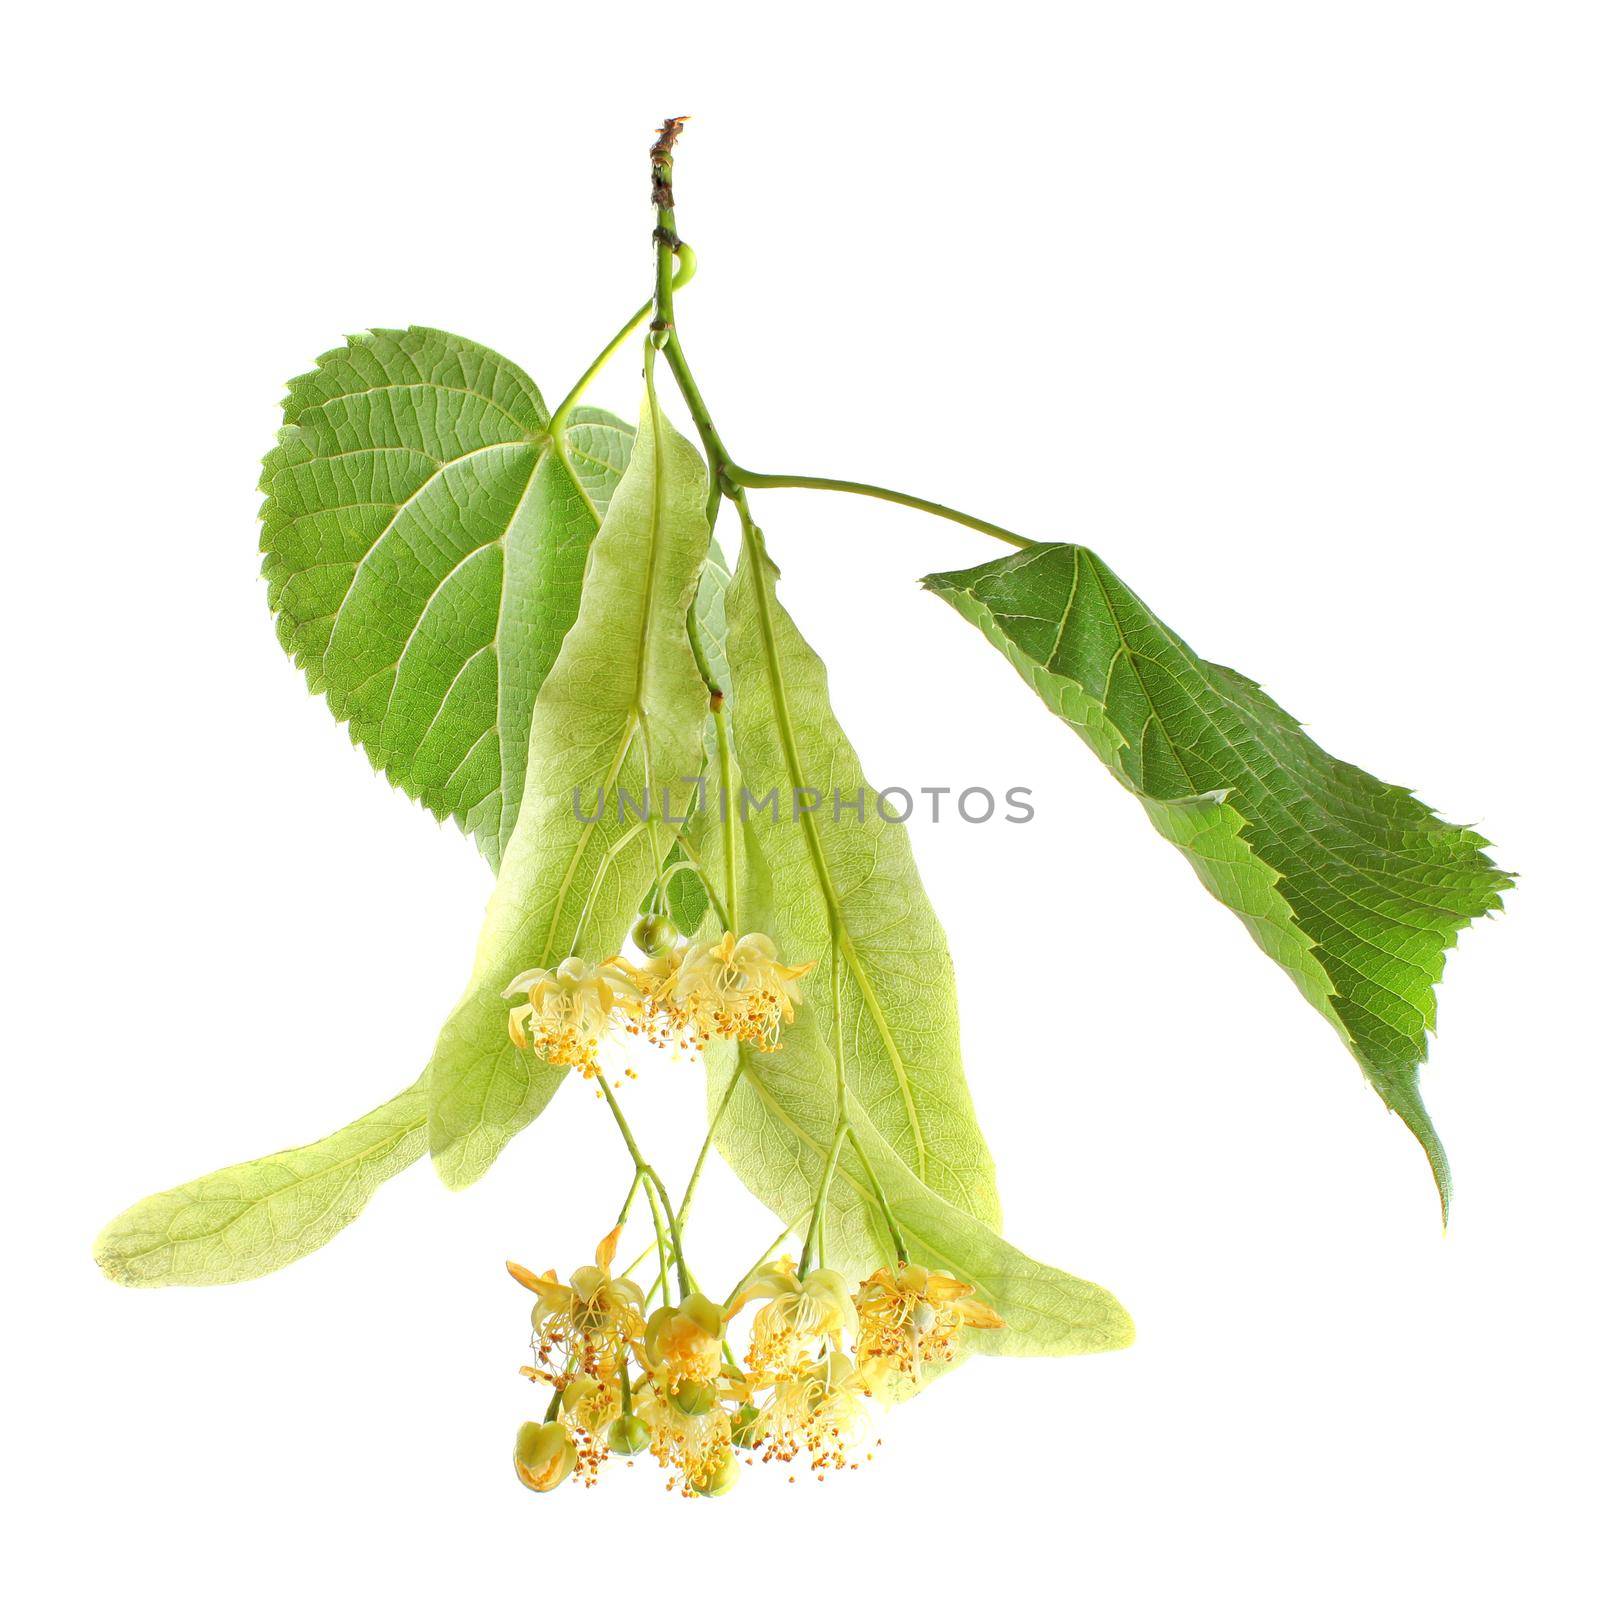 Linden (Tilia cordata) leaves and flowers, isolated on white background. by Ivanko